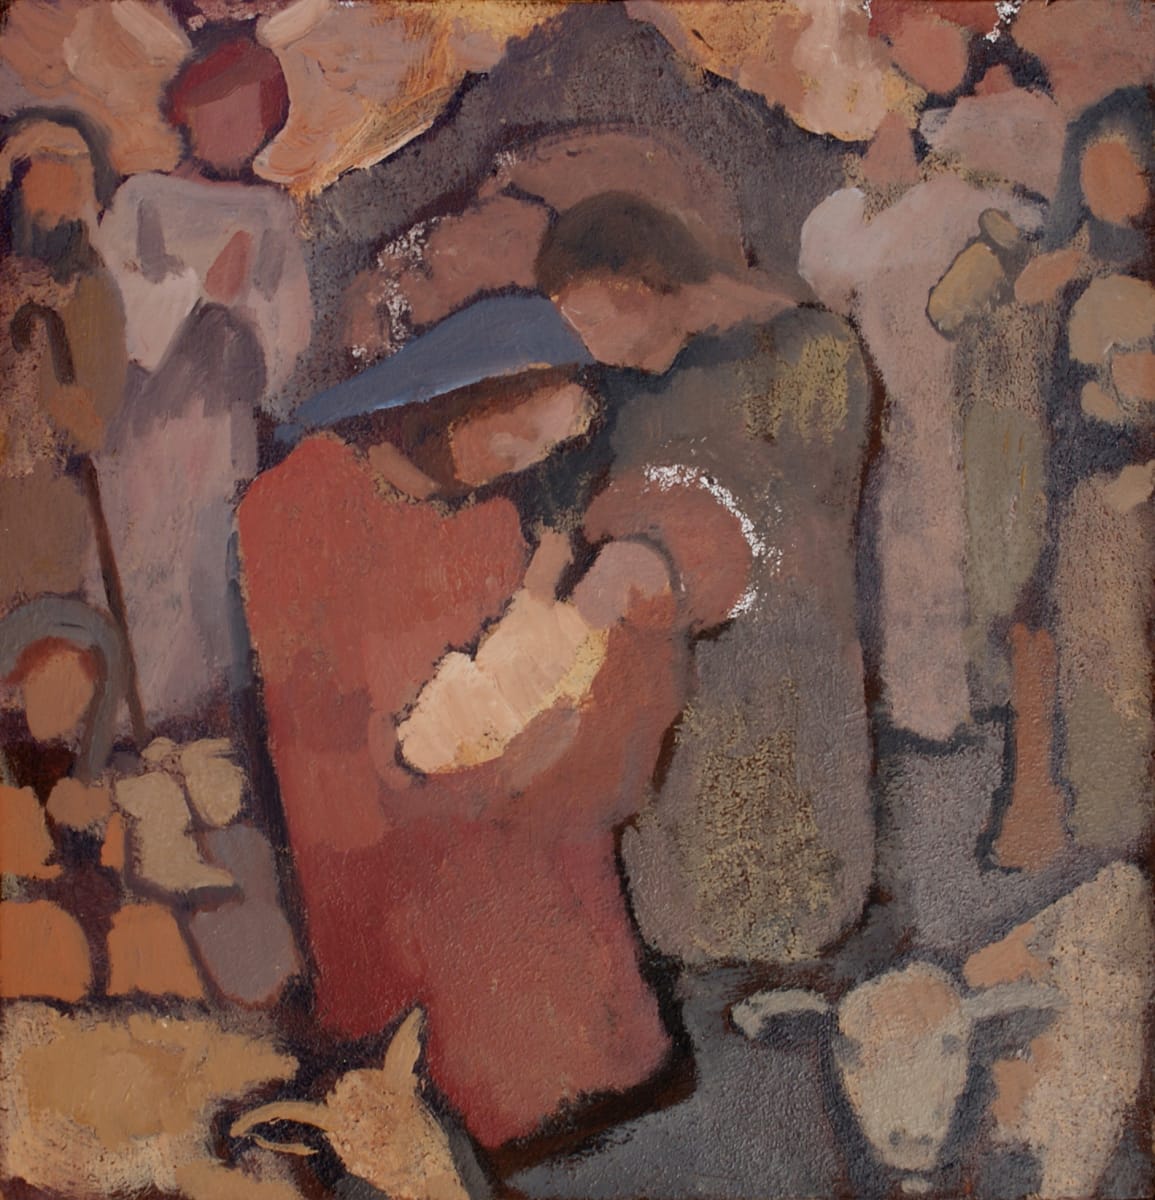 Nativity III by J. Kirk Richards  Image: Holy family surrounded by worshippers. 